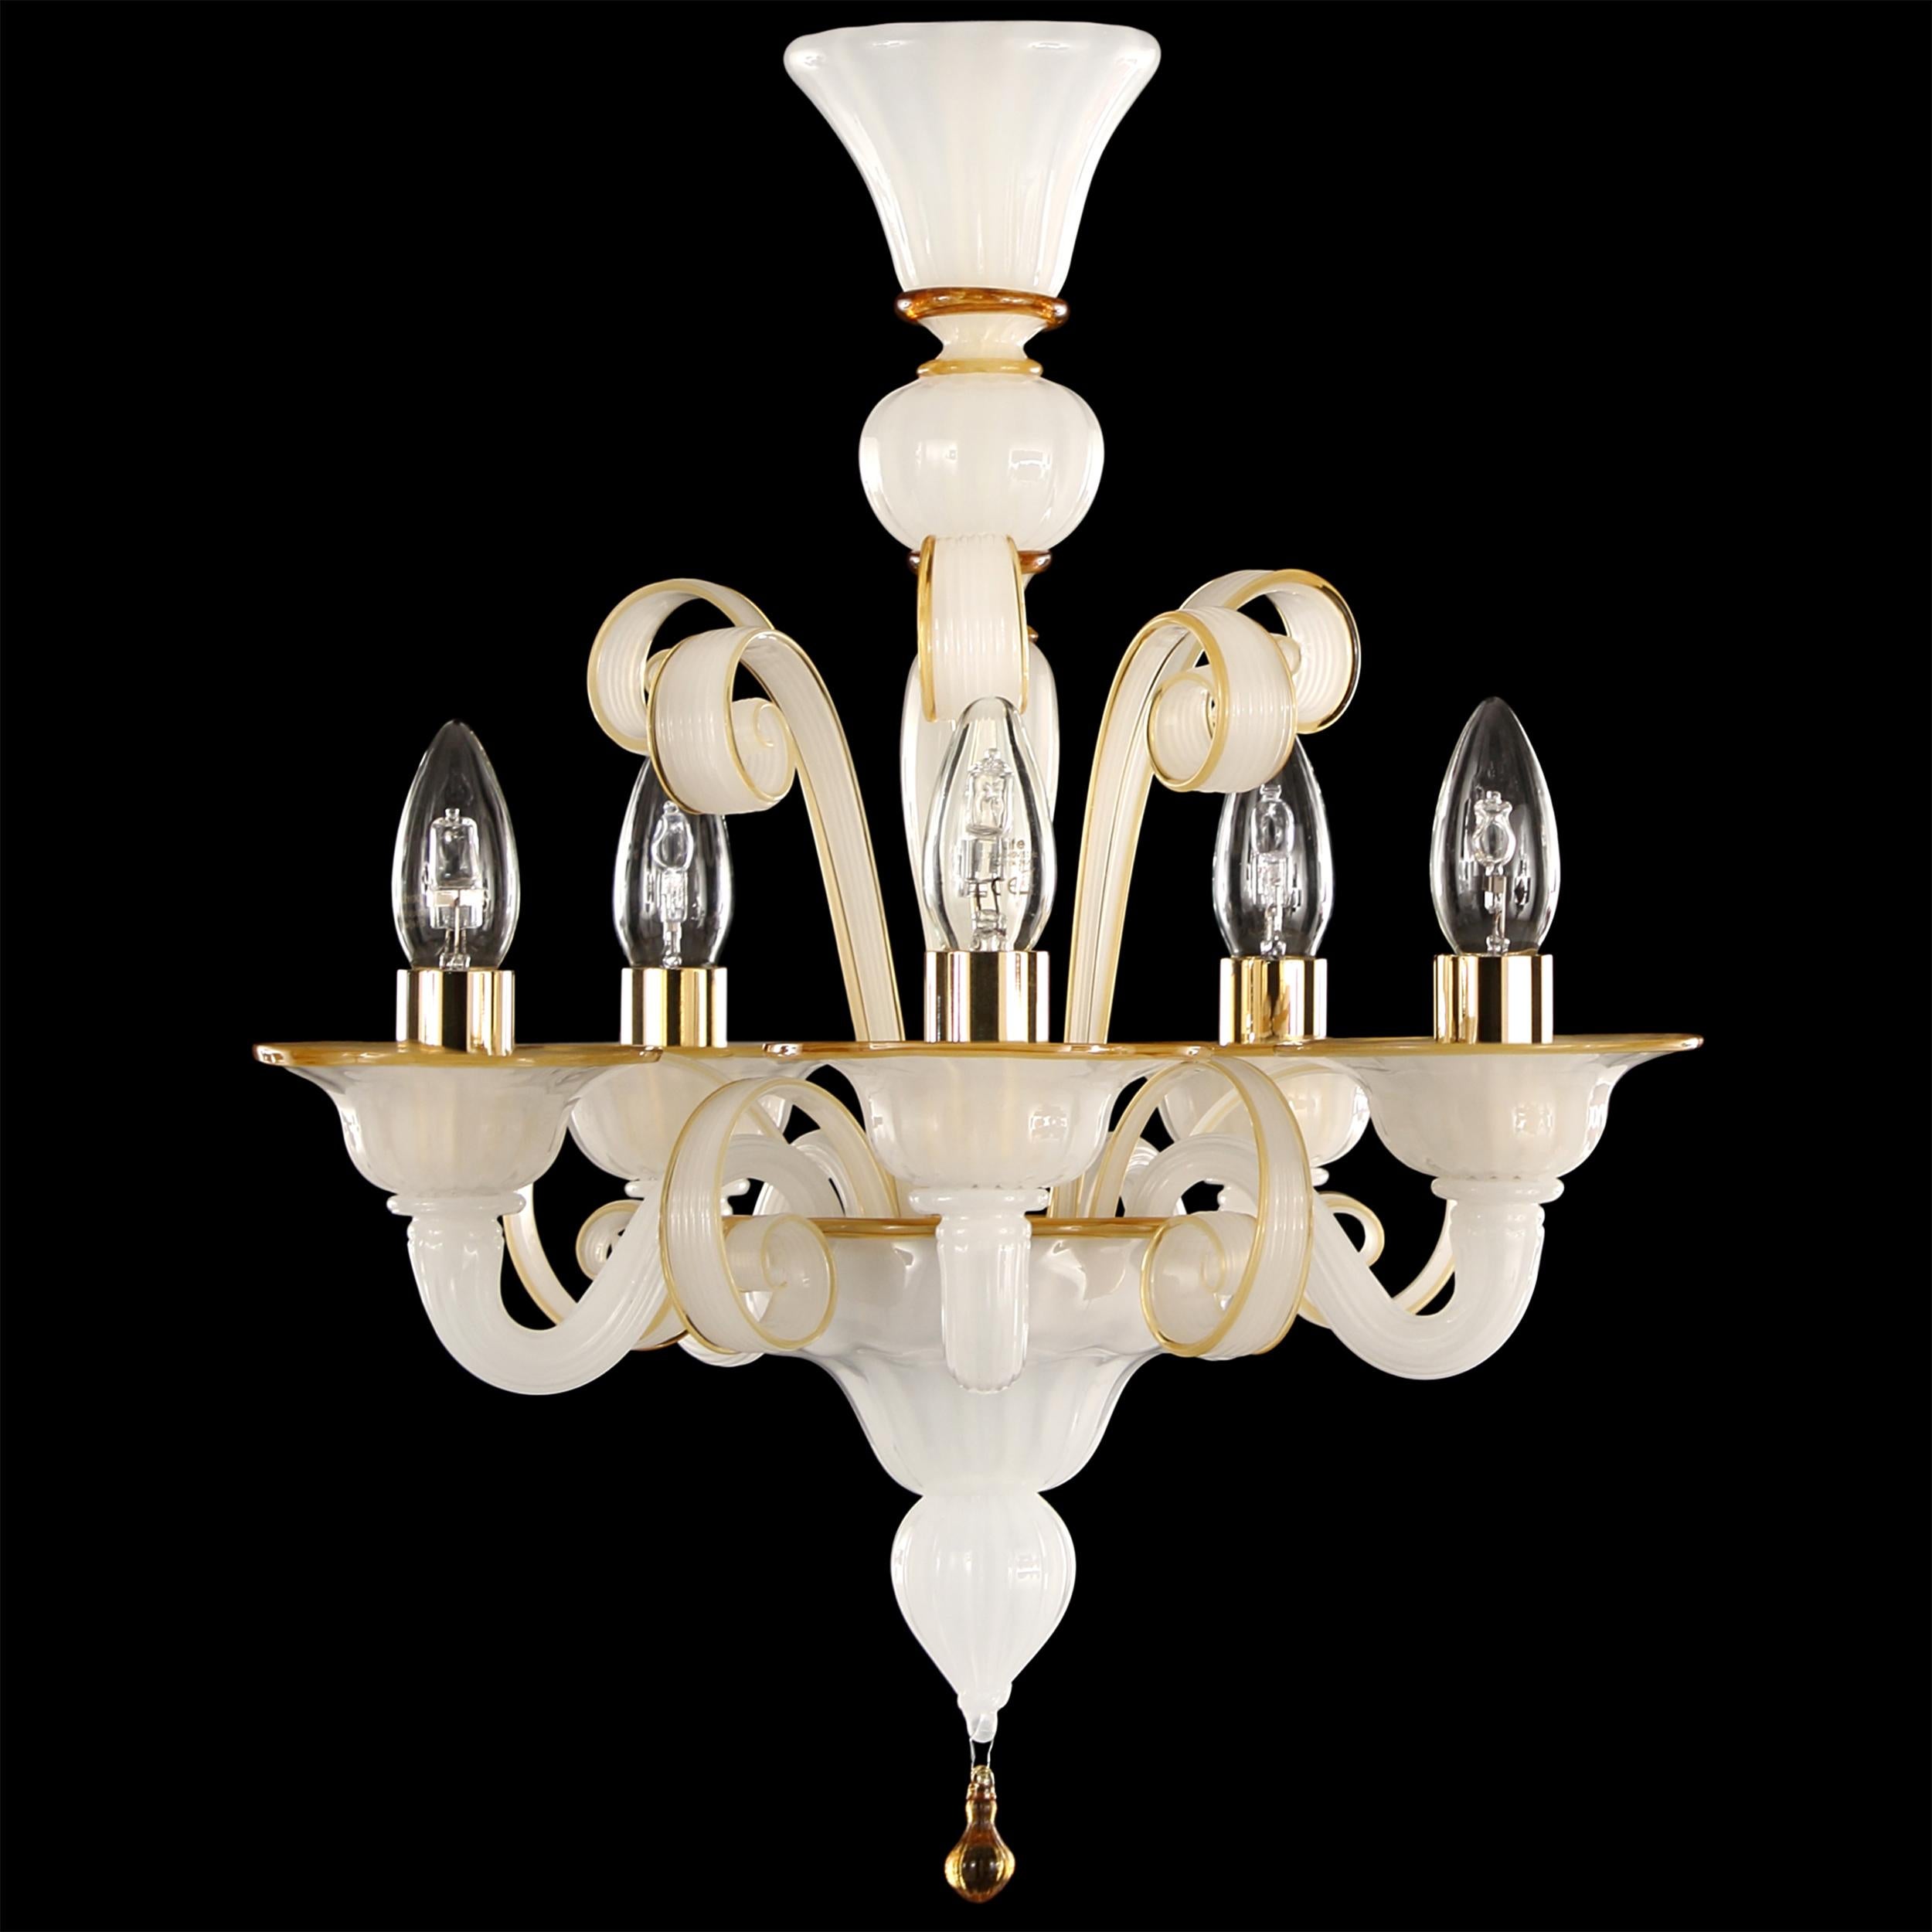 Capriccio chandelier, 5 lights, white silk and gold artistic glass, with curly ornamental elements by Multiforme.
Inspired by the Classic Venetian tradition it is characterised by a central column where many blown glass “pastoral” elements are